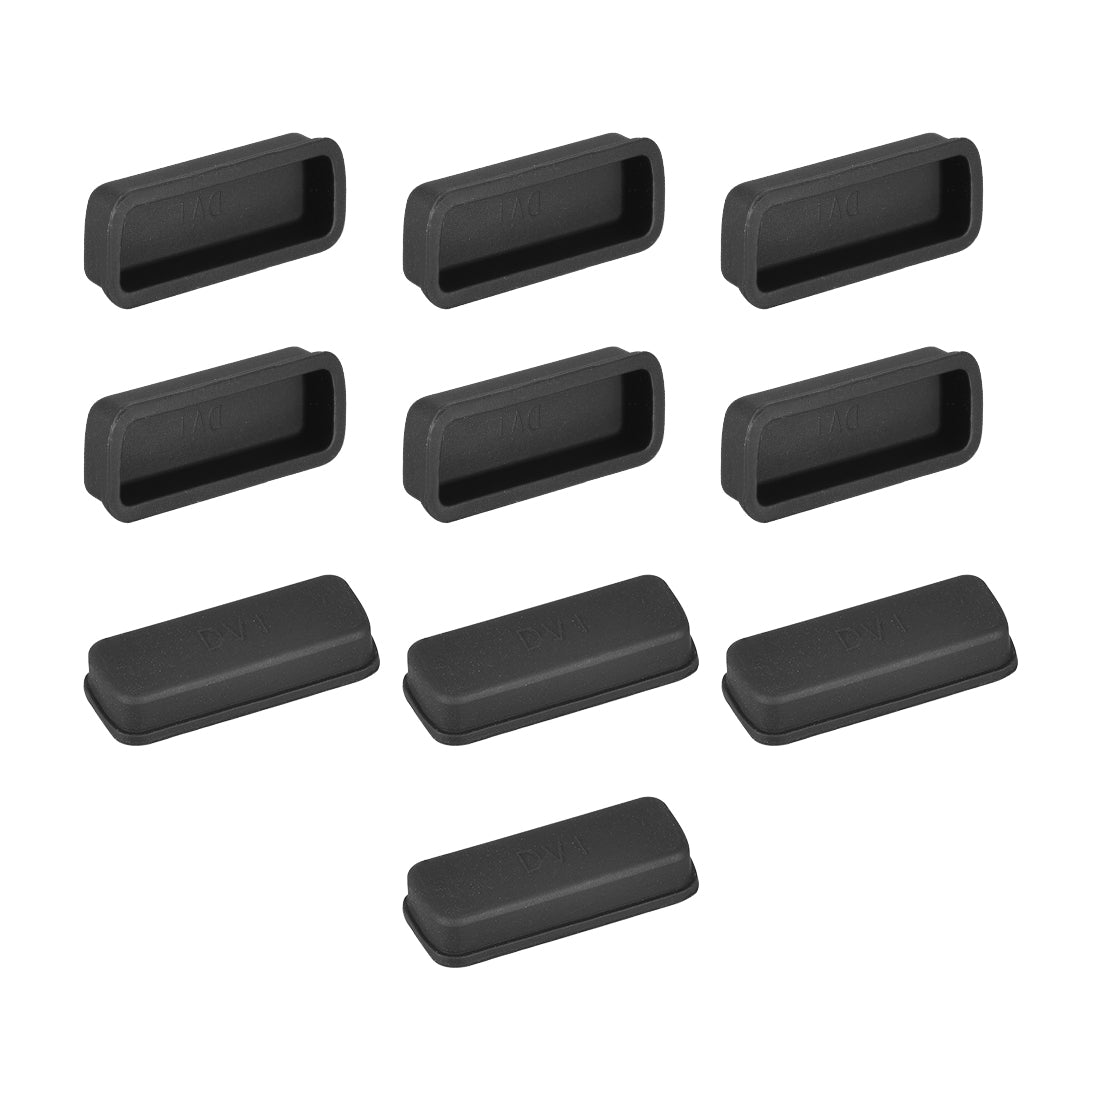 uxcell Uxcell Silicone DVI Video Port Anti-Dust Stopper Cap Cover Black 10pcs